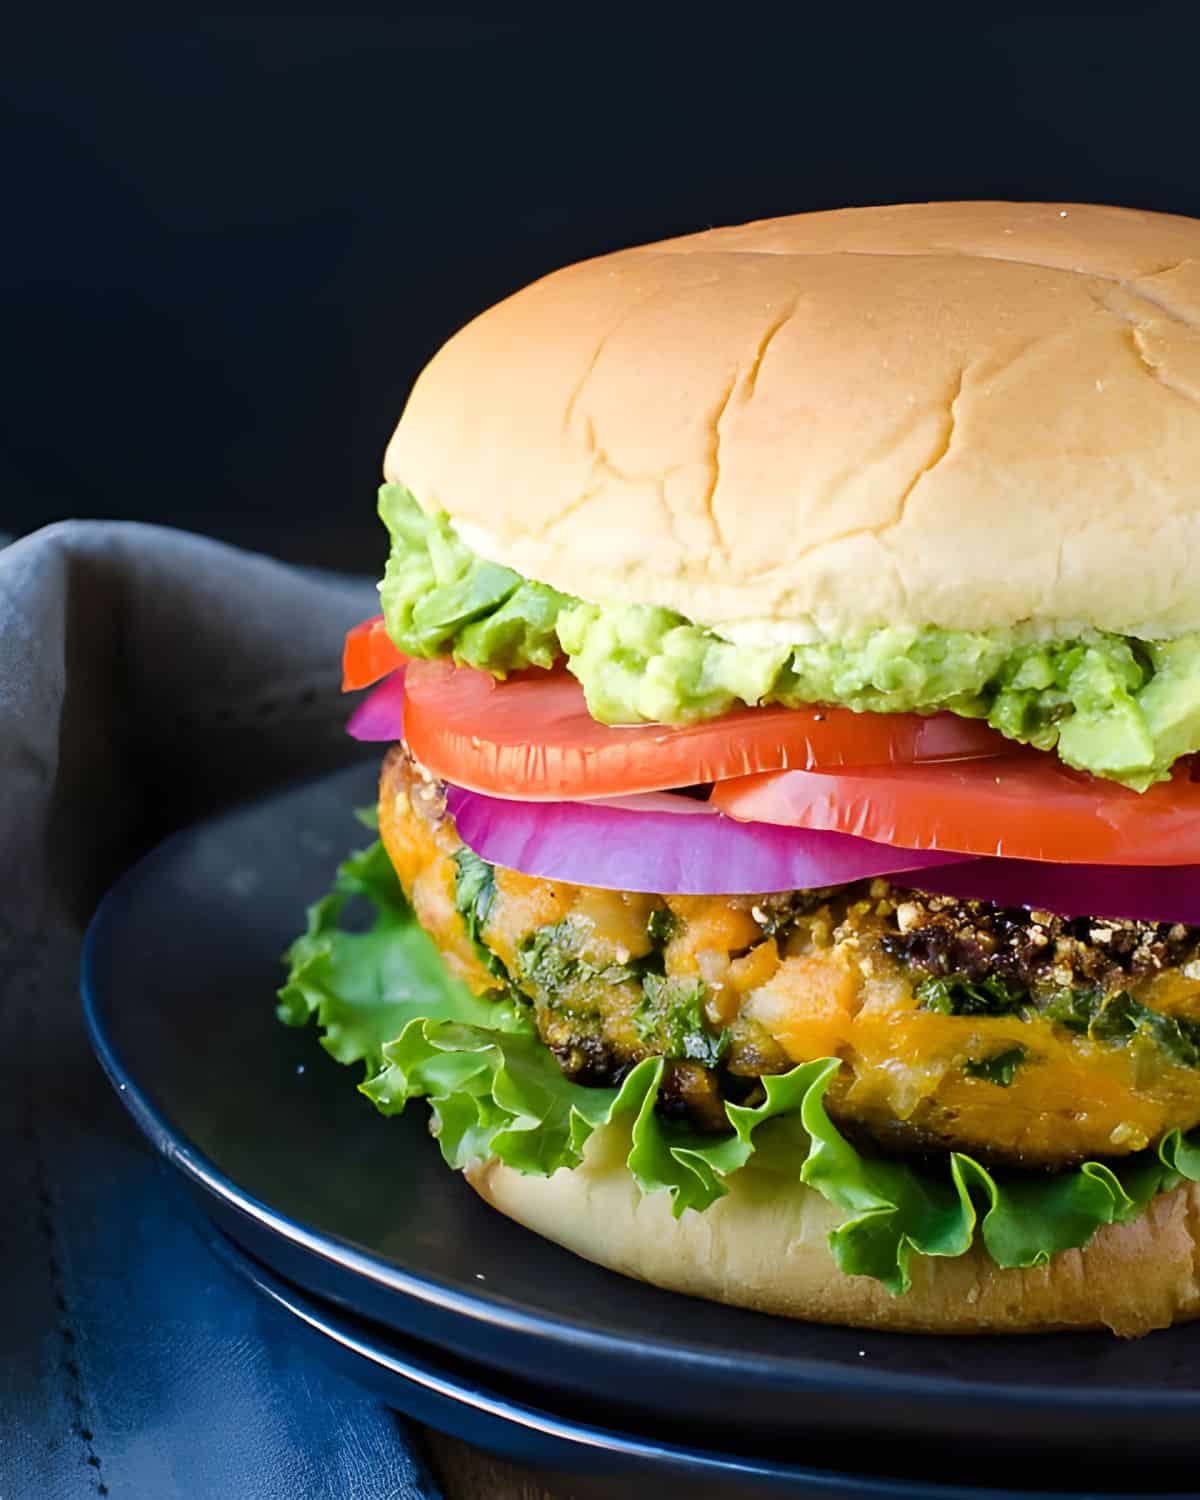 A veggie burger on a bun with toppings.